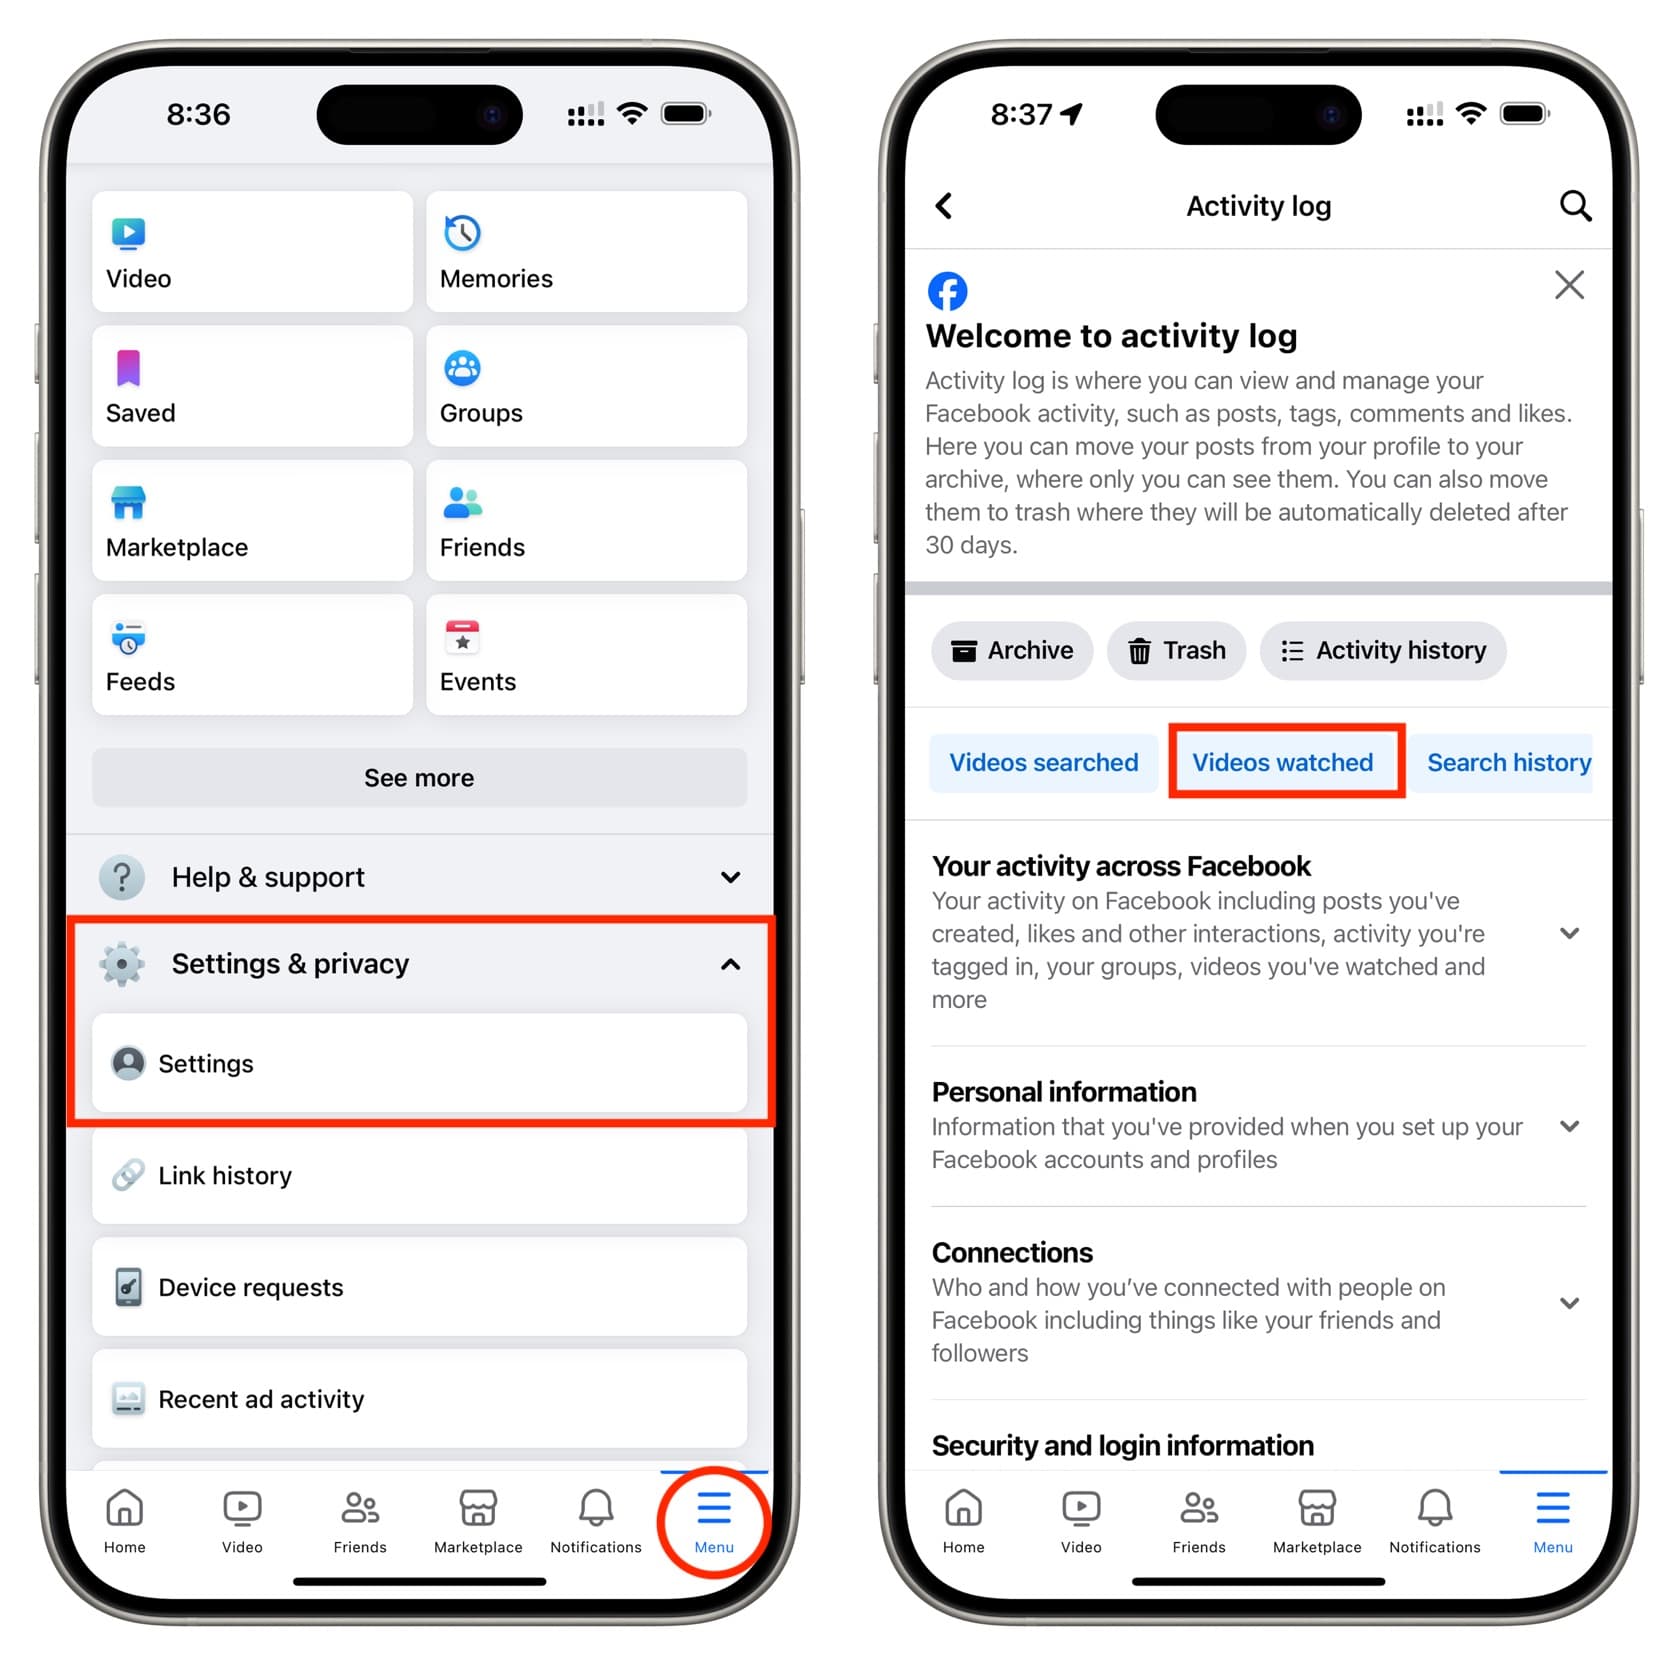 Tap Videos watched in Facebook Activity log settings on iPhone